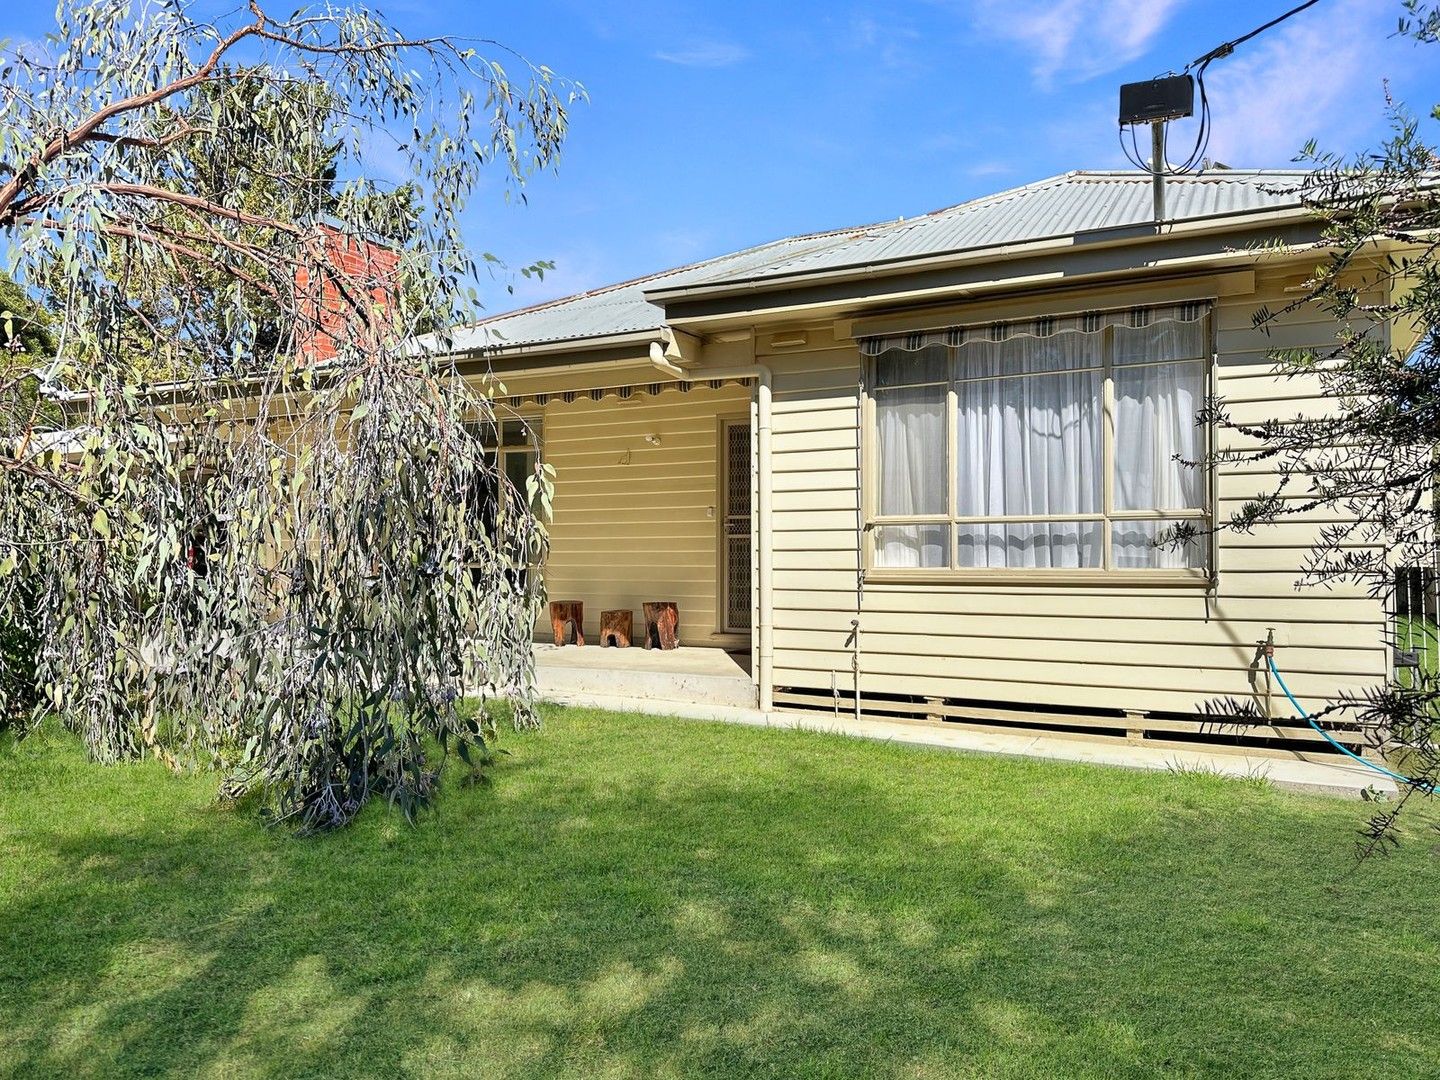 19 Alice Street,, Dunolly VIC 3472, Image 0